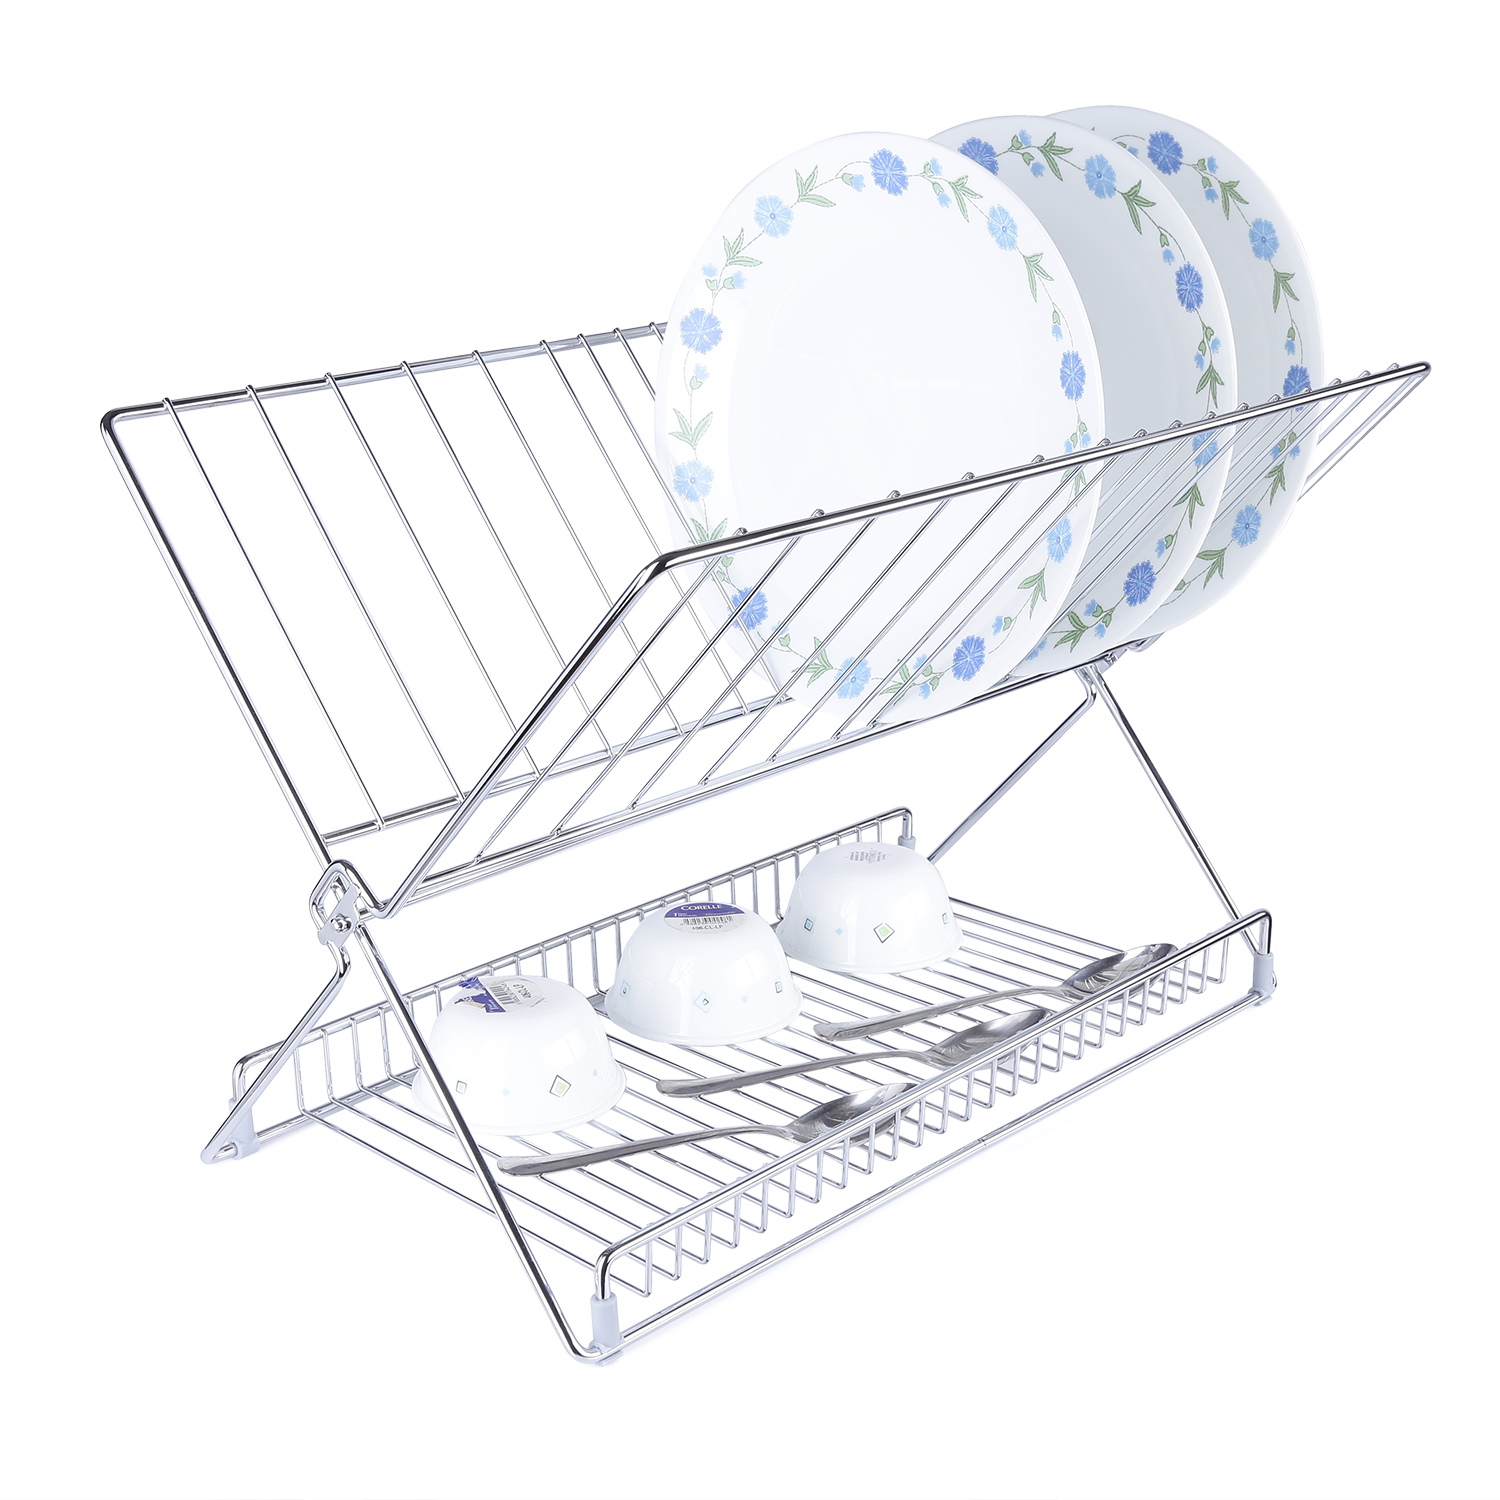 Hettich Stainless Steel Cargo Portable Dish Drainer with PVC Tray - 5 Year Warranty Against Rusting 